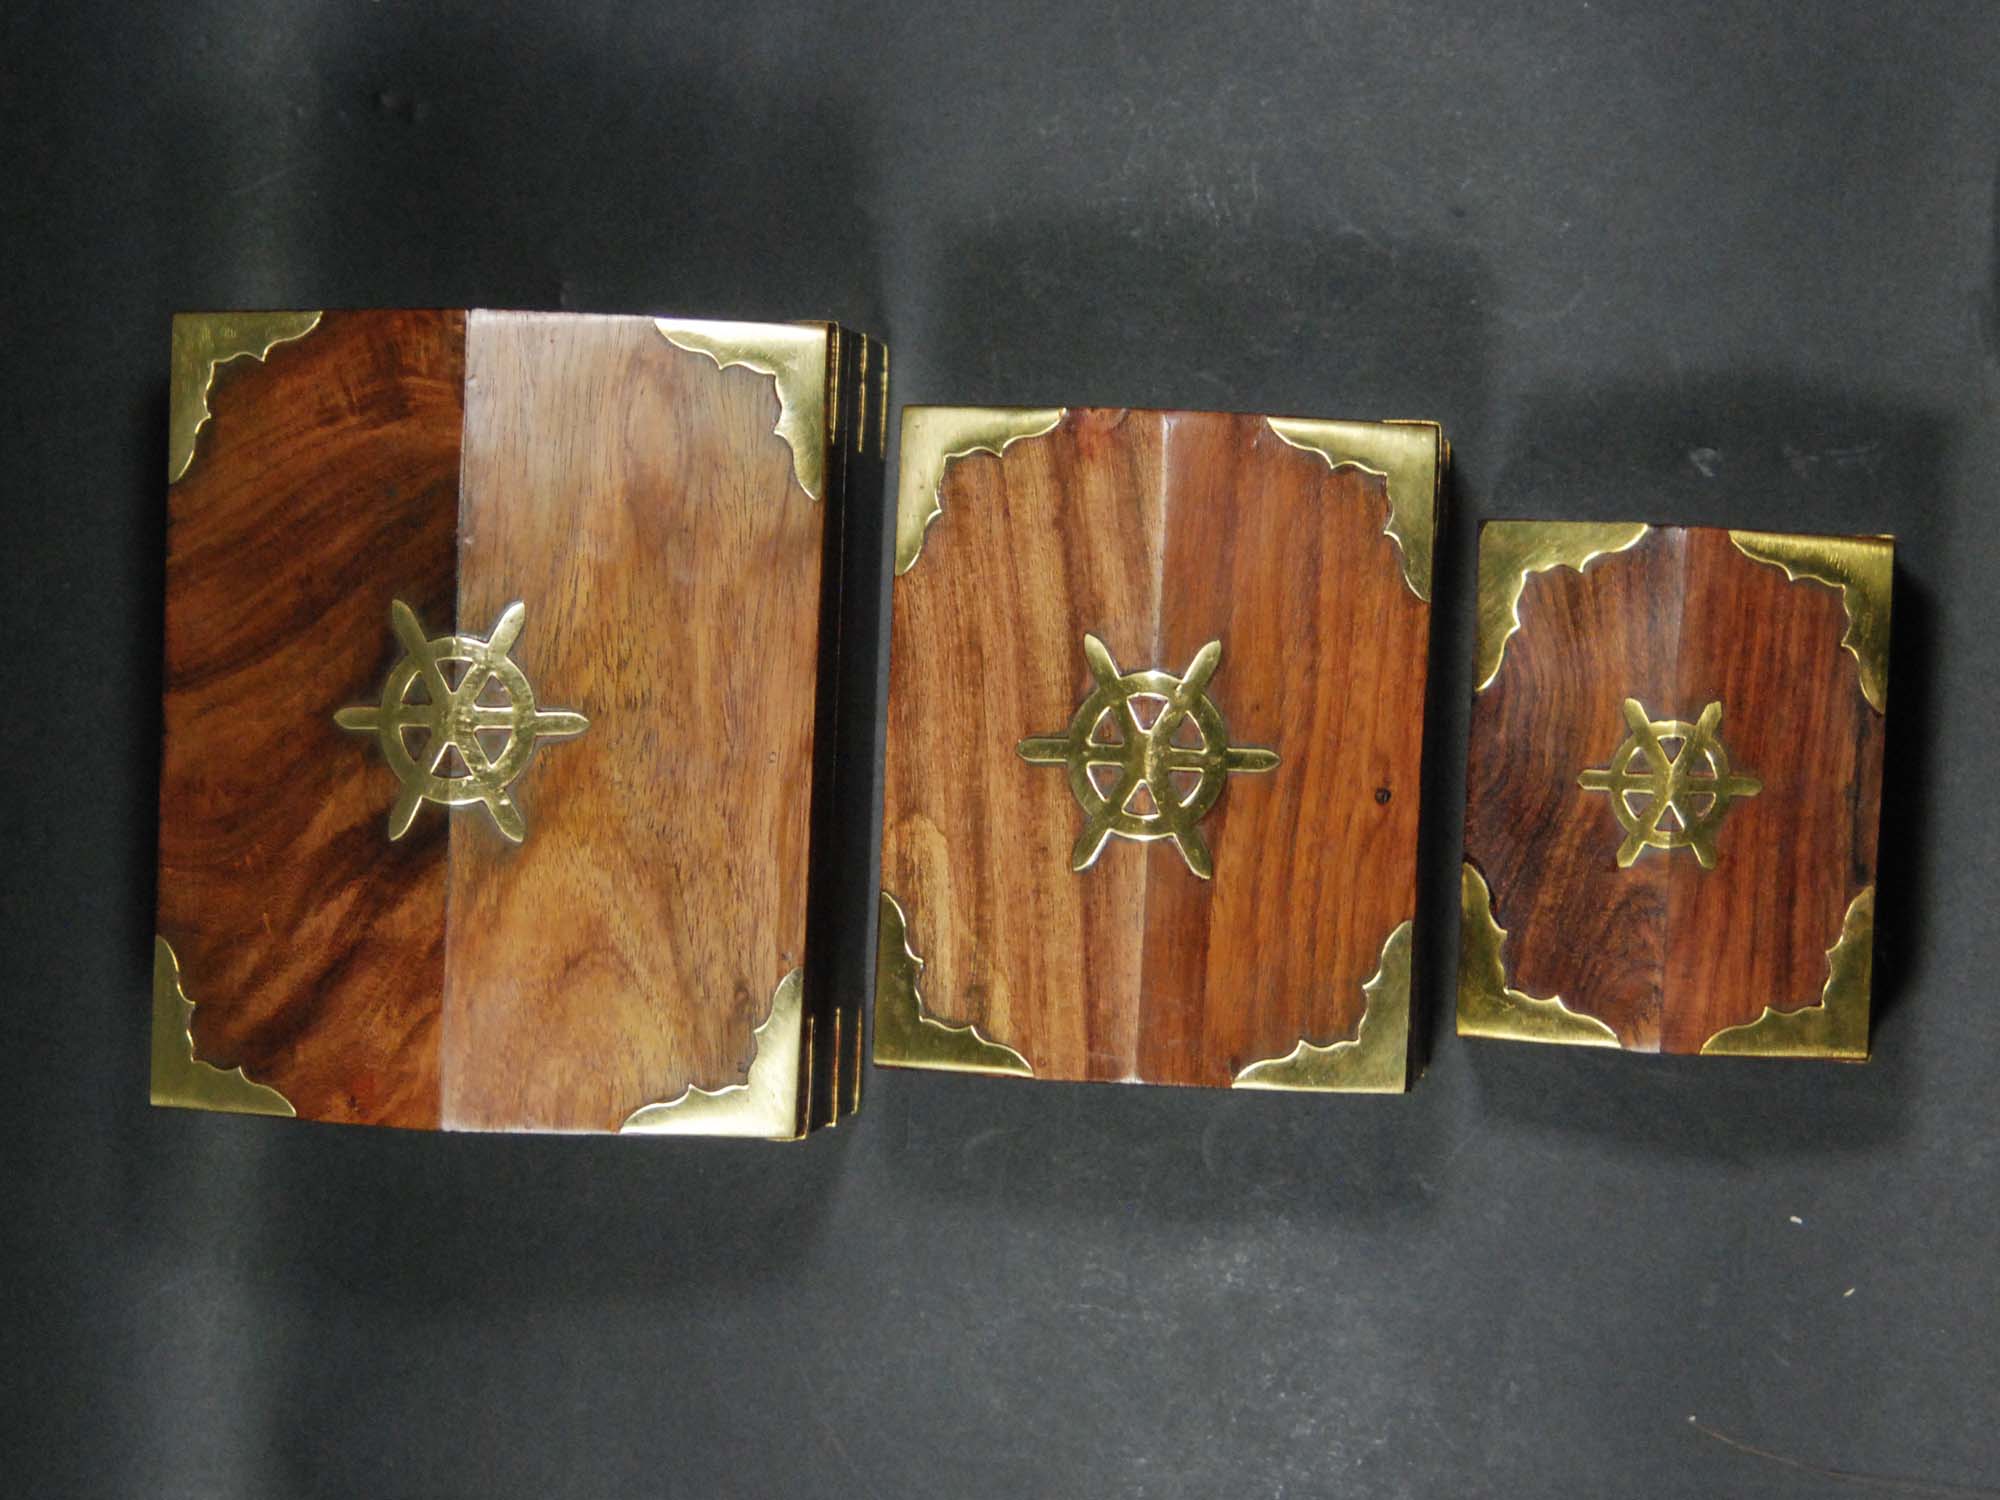 Treasure Chest: Nautical, Inlaid, Carved, 3-Piece cremation boxes